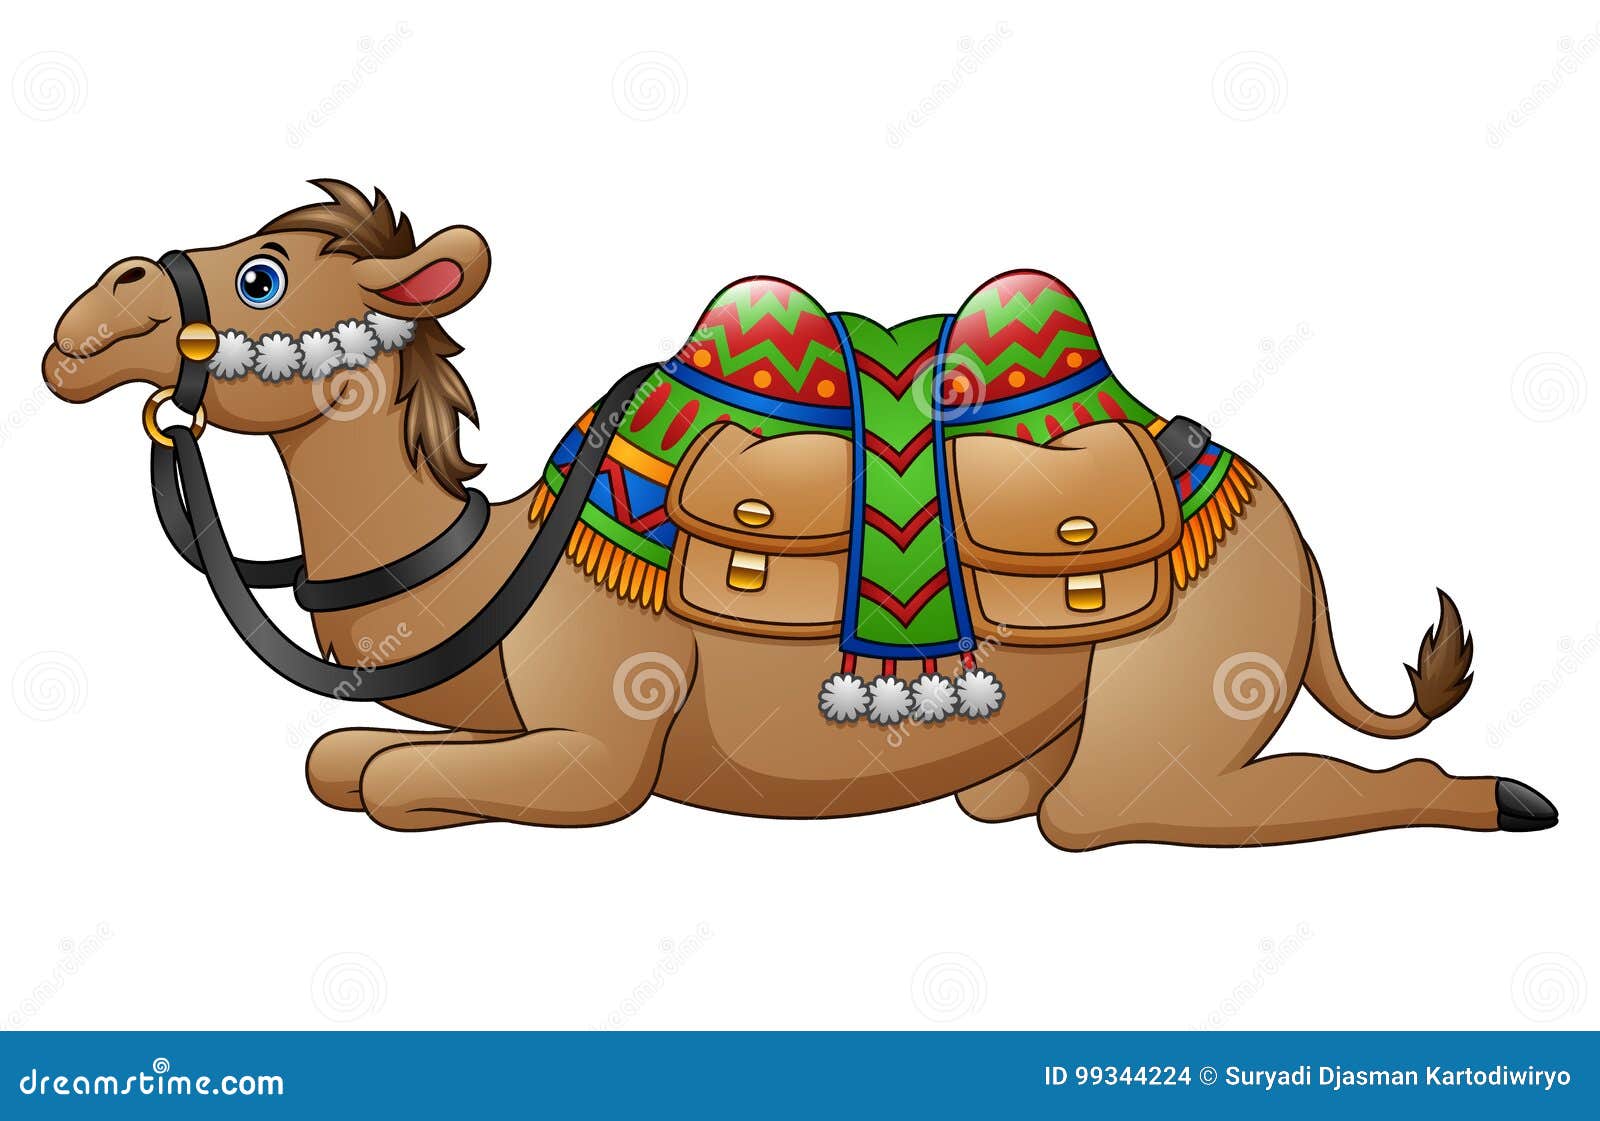 Cartoon camel with saddle stock vector. Illustration of animal - 99344224